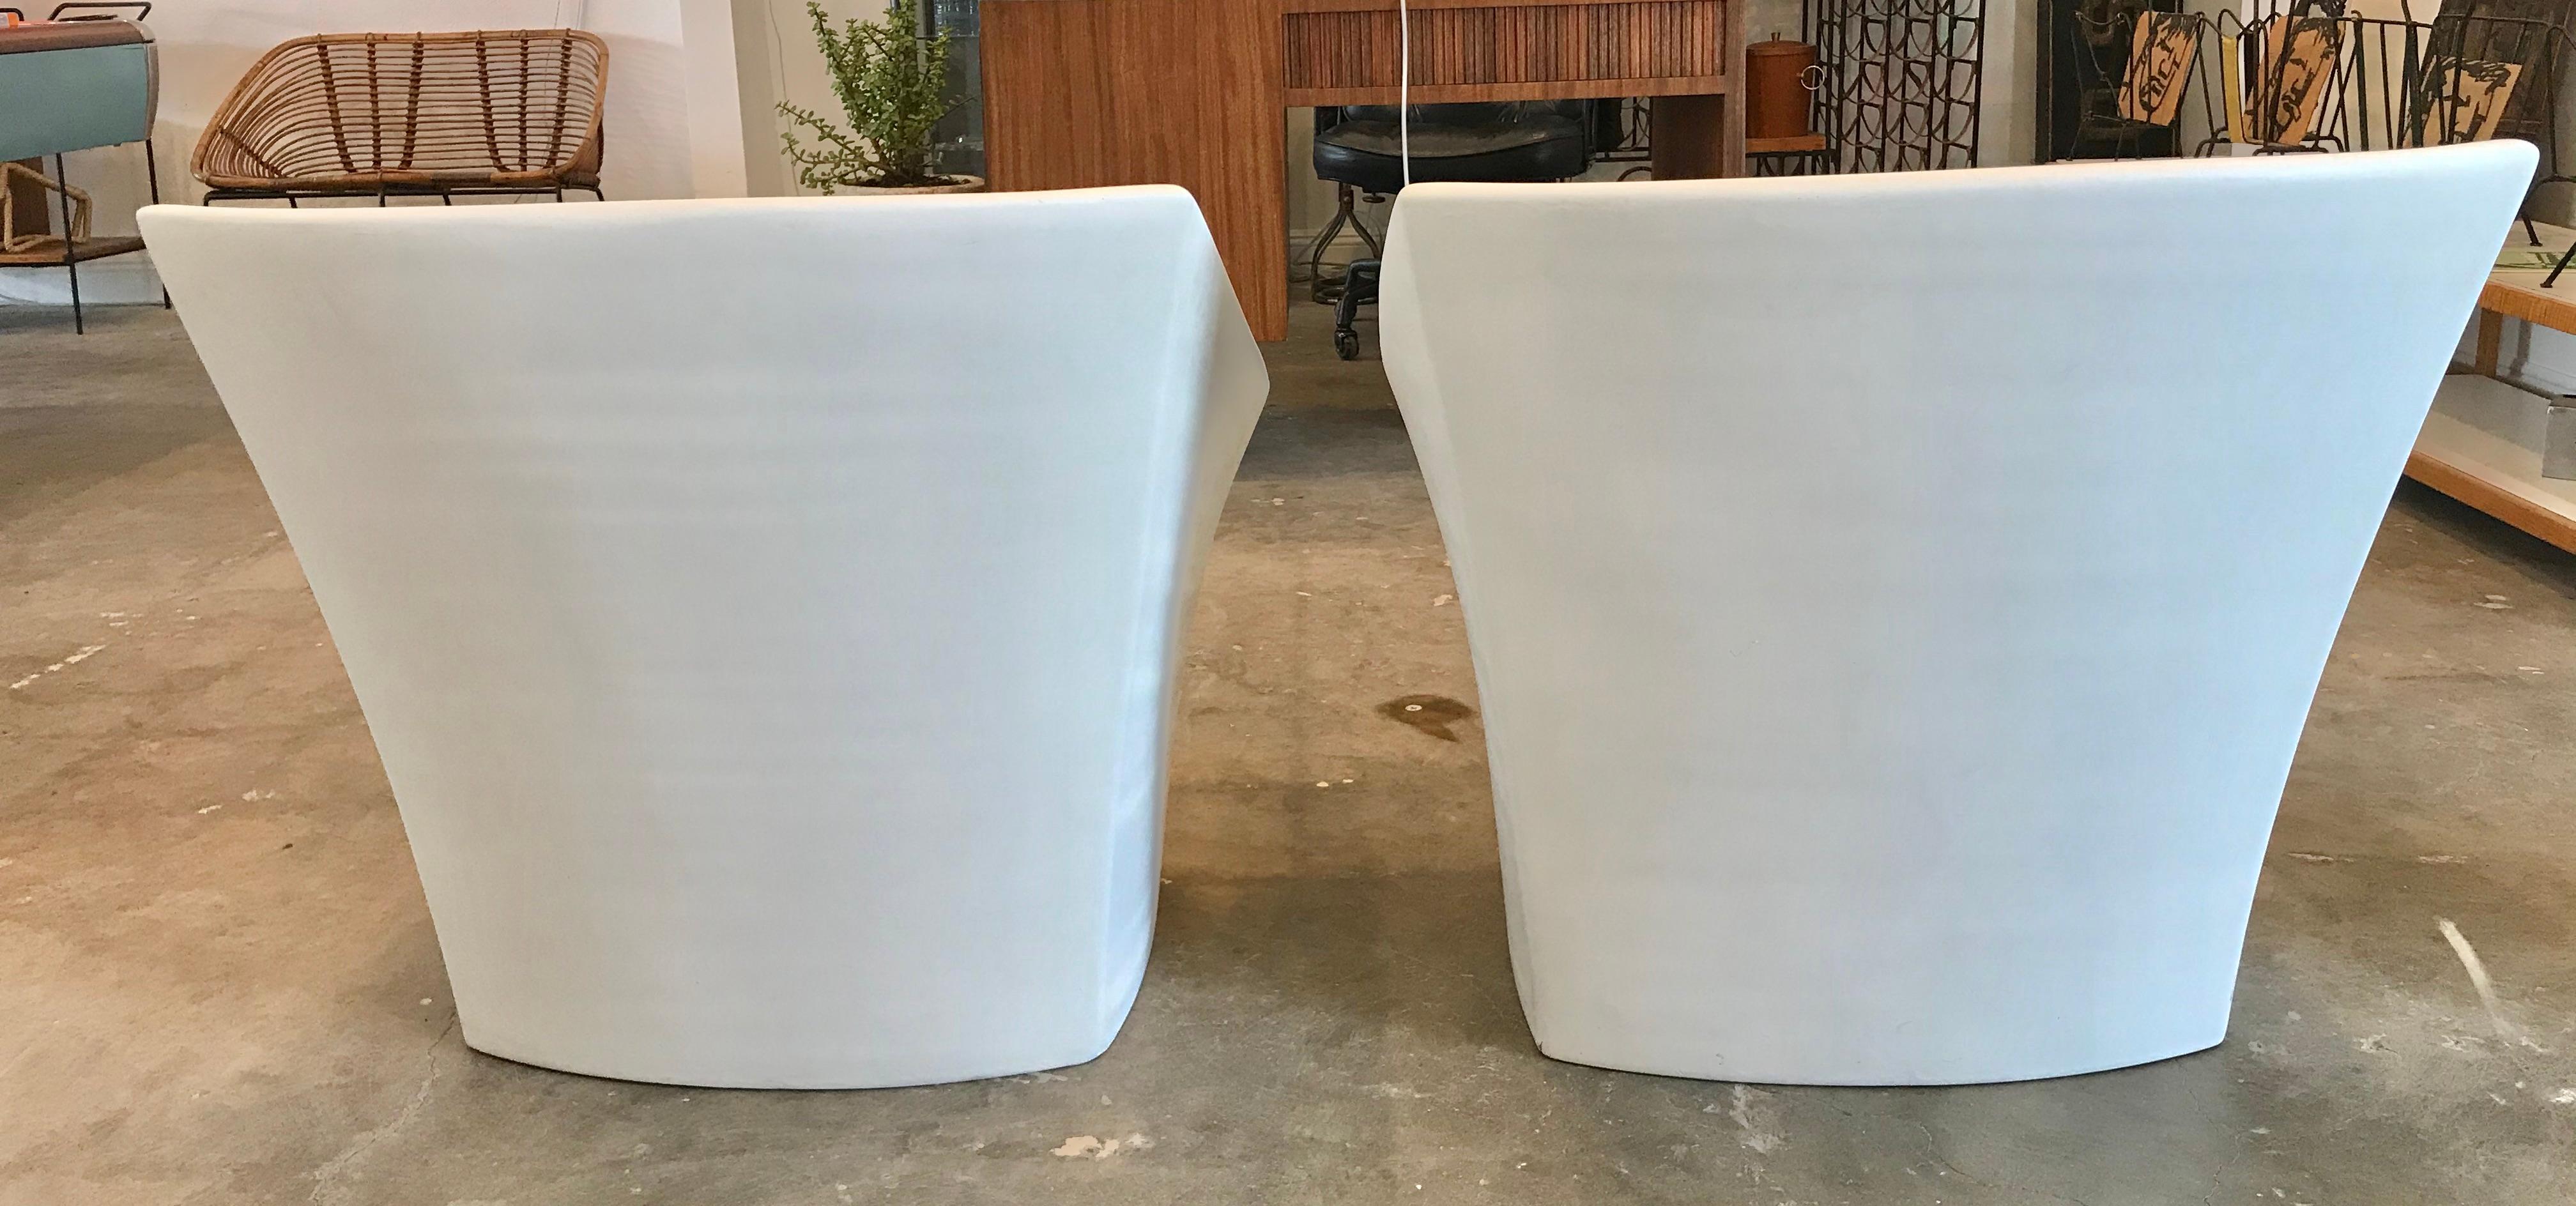 Fantastic pair of sculptural fiberglass outdoor chairs by Douglas Deeds for Architectural Fiberglass. Great scale and lines with large seating area. Perfect indoors or out. Stamped on bottom. Good vintage condition. 

